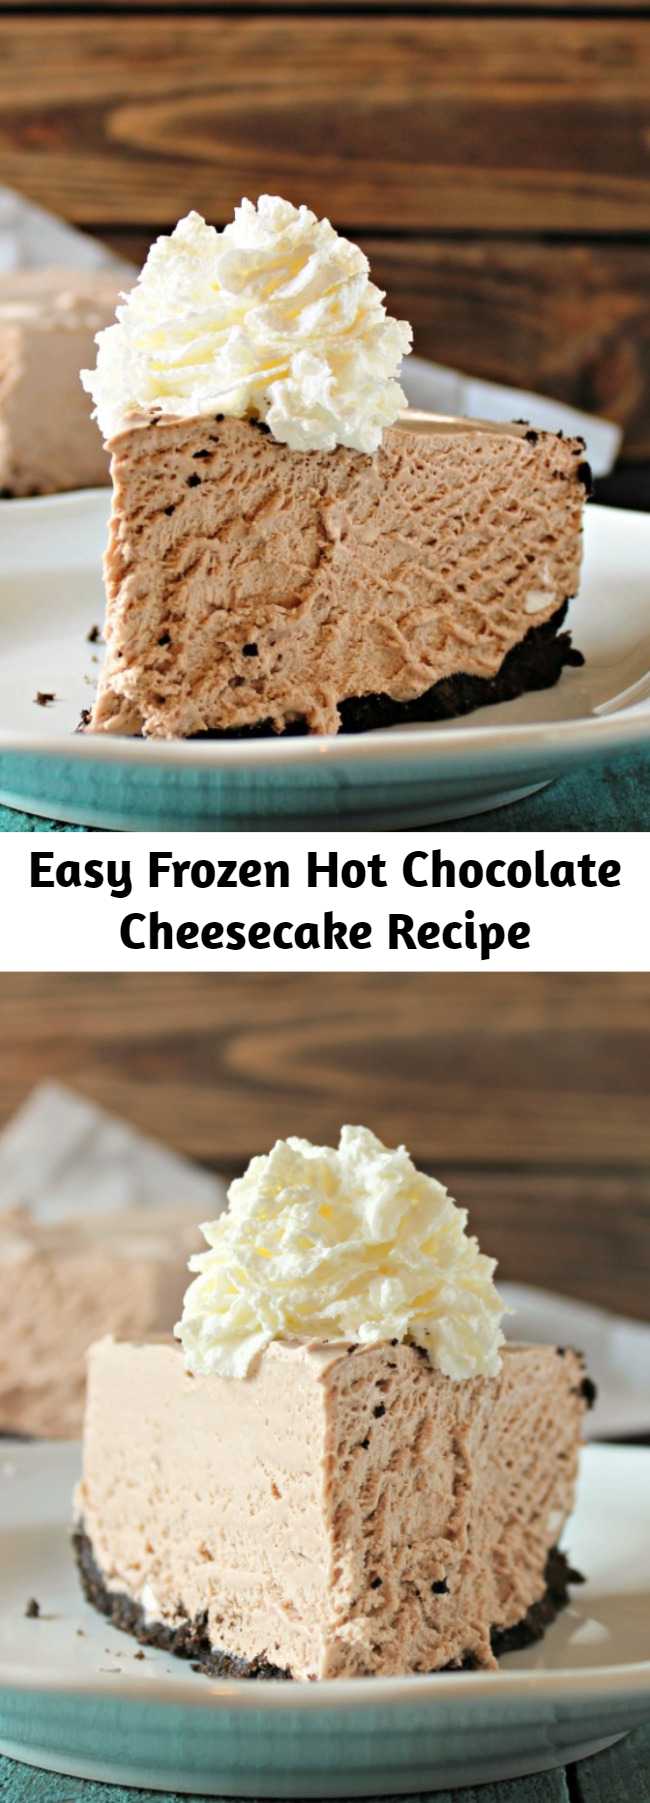 Easy Frozen Hot Chocolate Cheesecake Recipe - A frozen hot chocolate cheesecake (ice cream, chesesecake-flavored pie) with an oreo crust, mini marshmallows, and swirls of marshmallows mixed throughout.